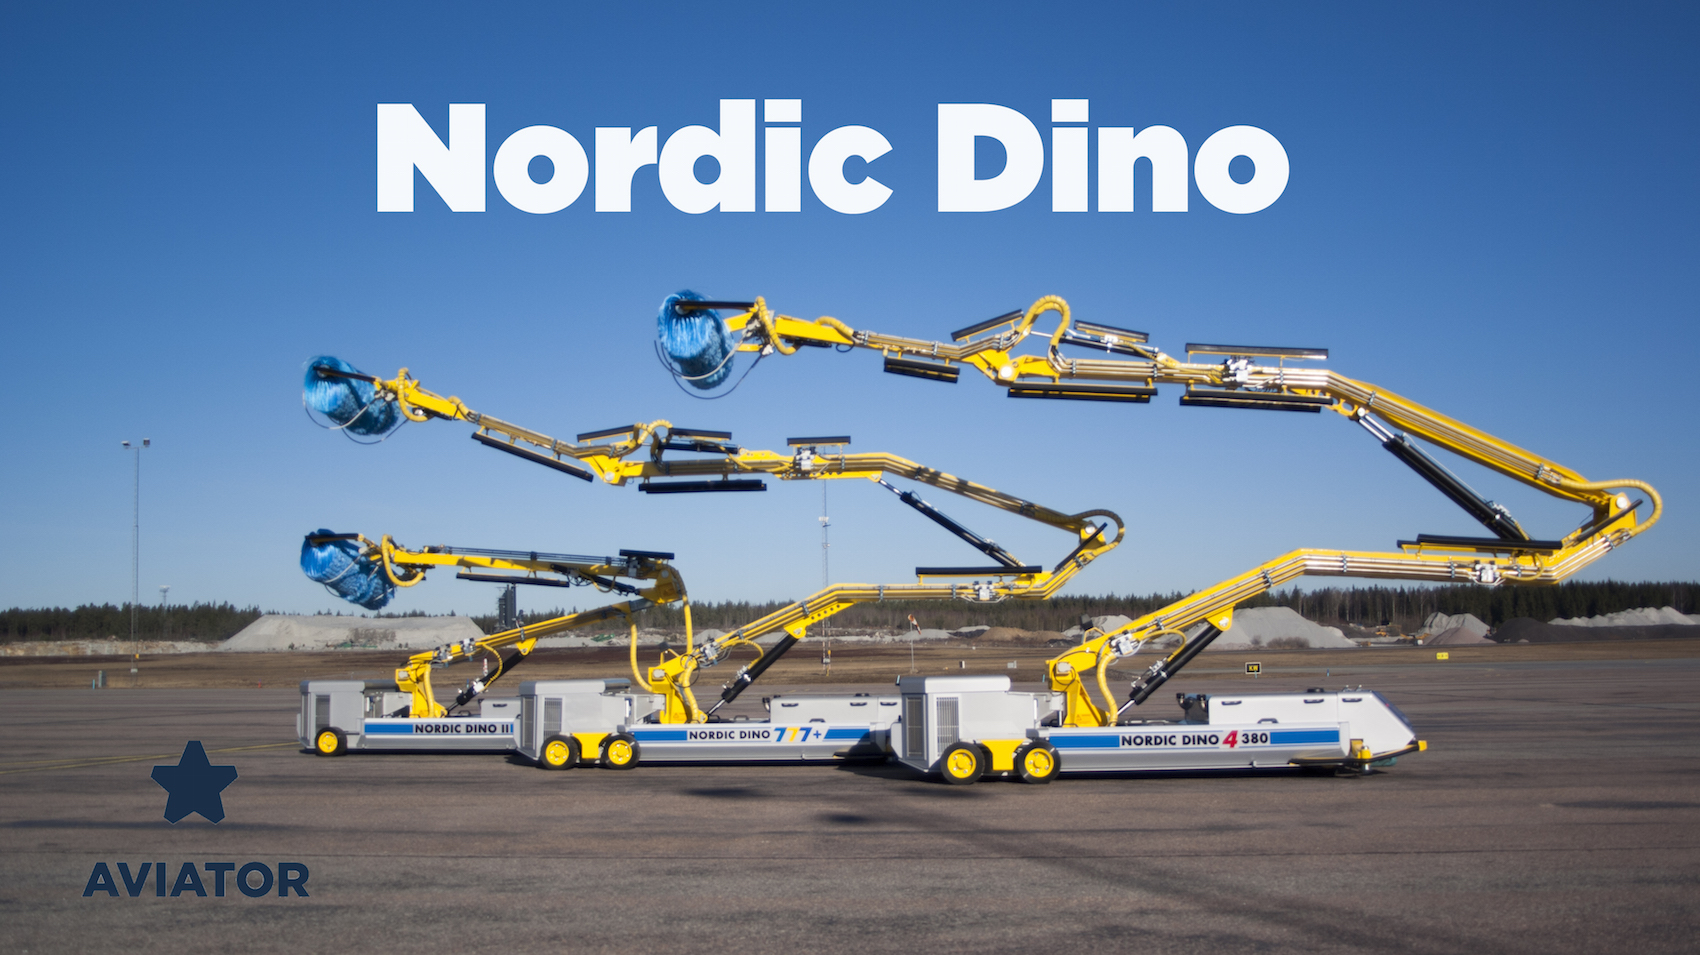 Aircraft exterior cleaning robot - Nordic Dino